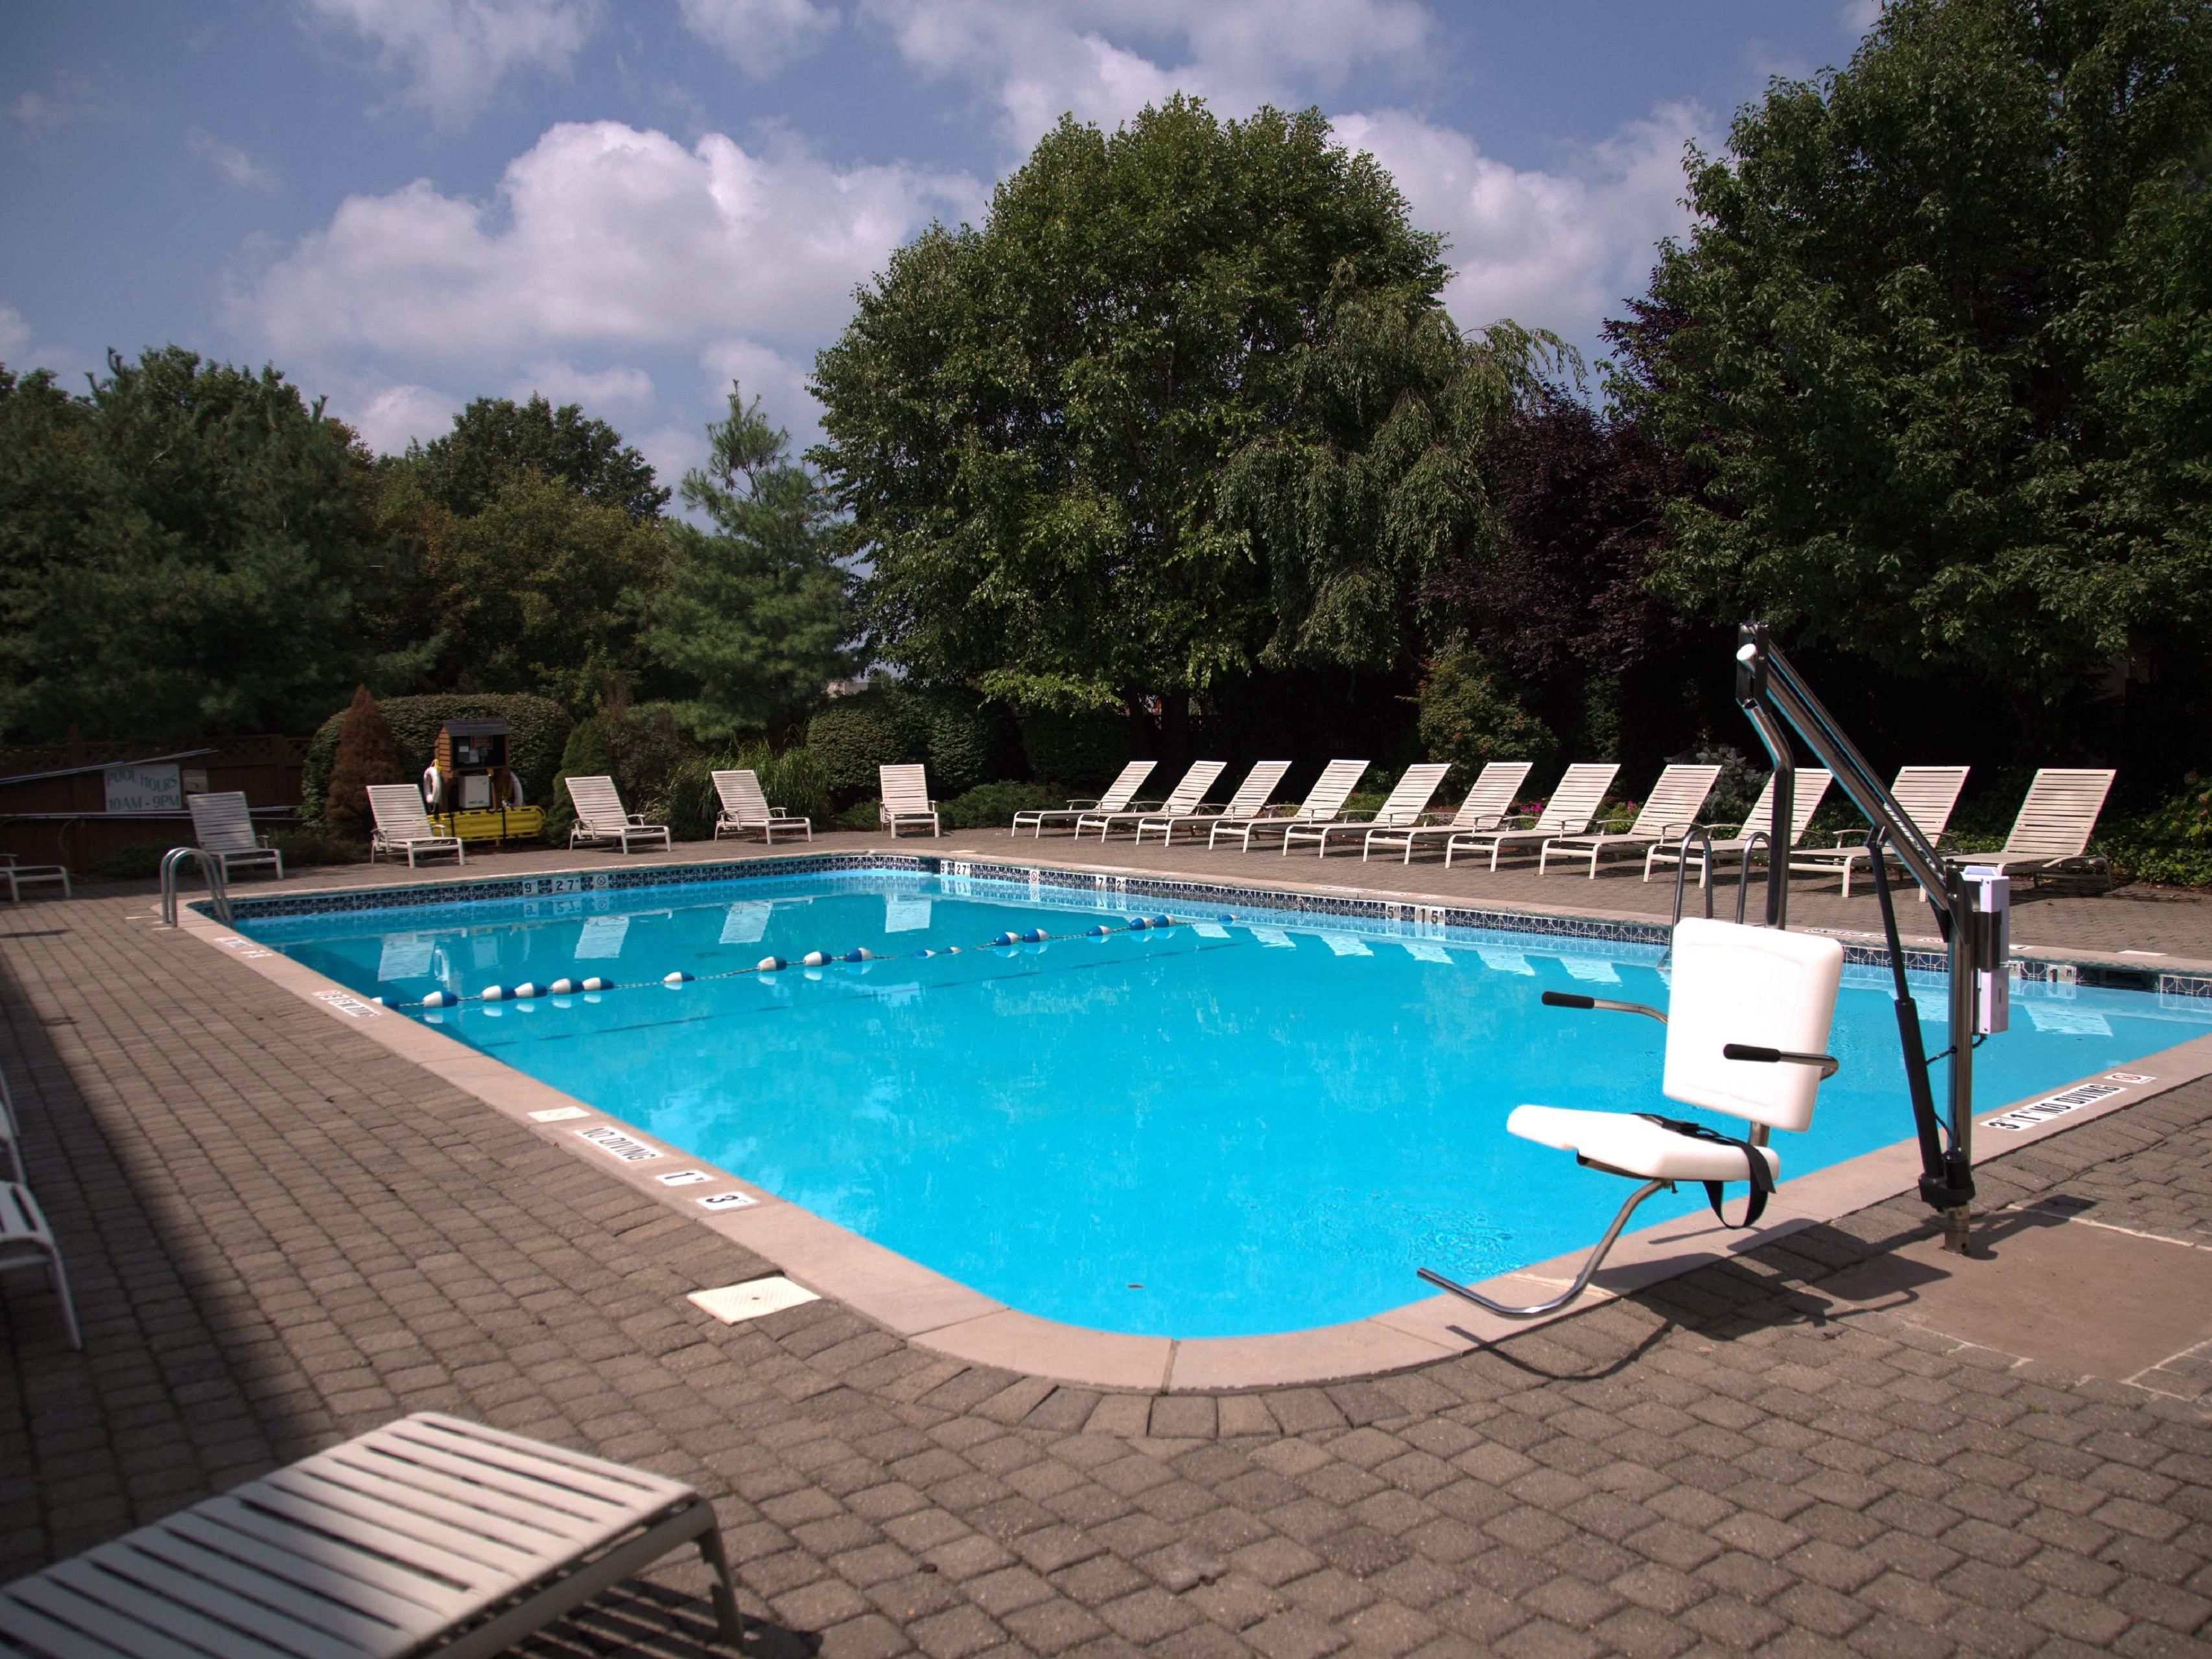 Book Your Pool Package With Us!